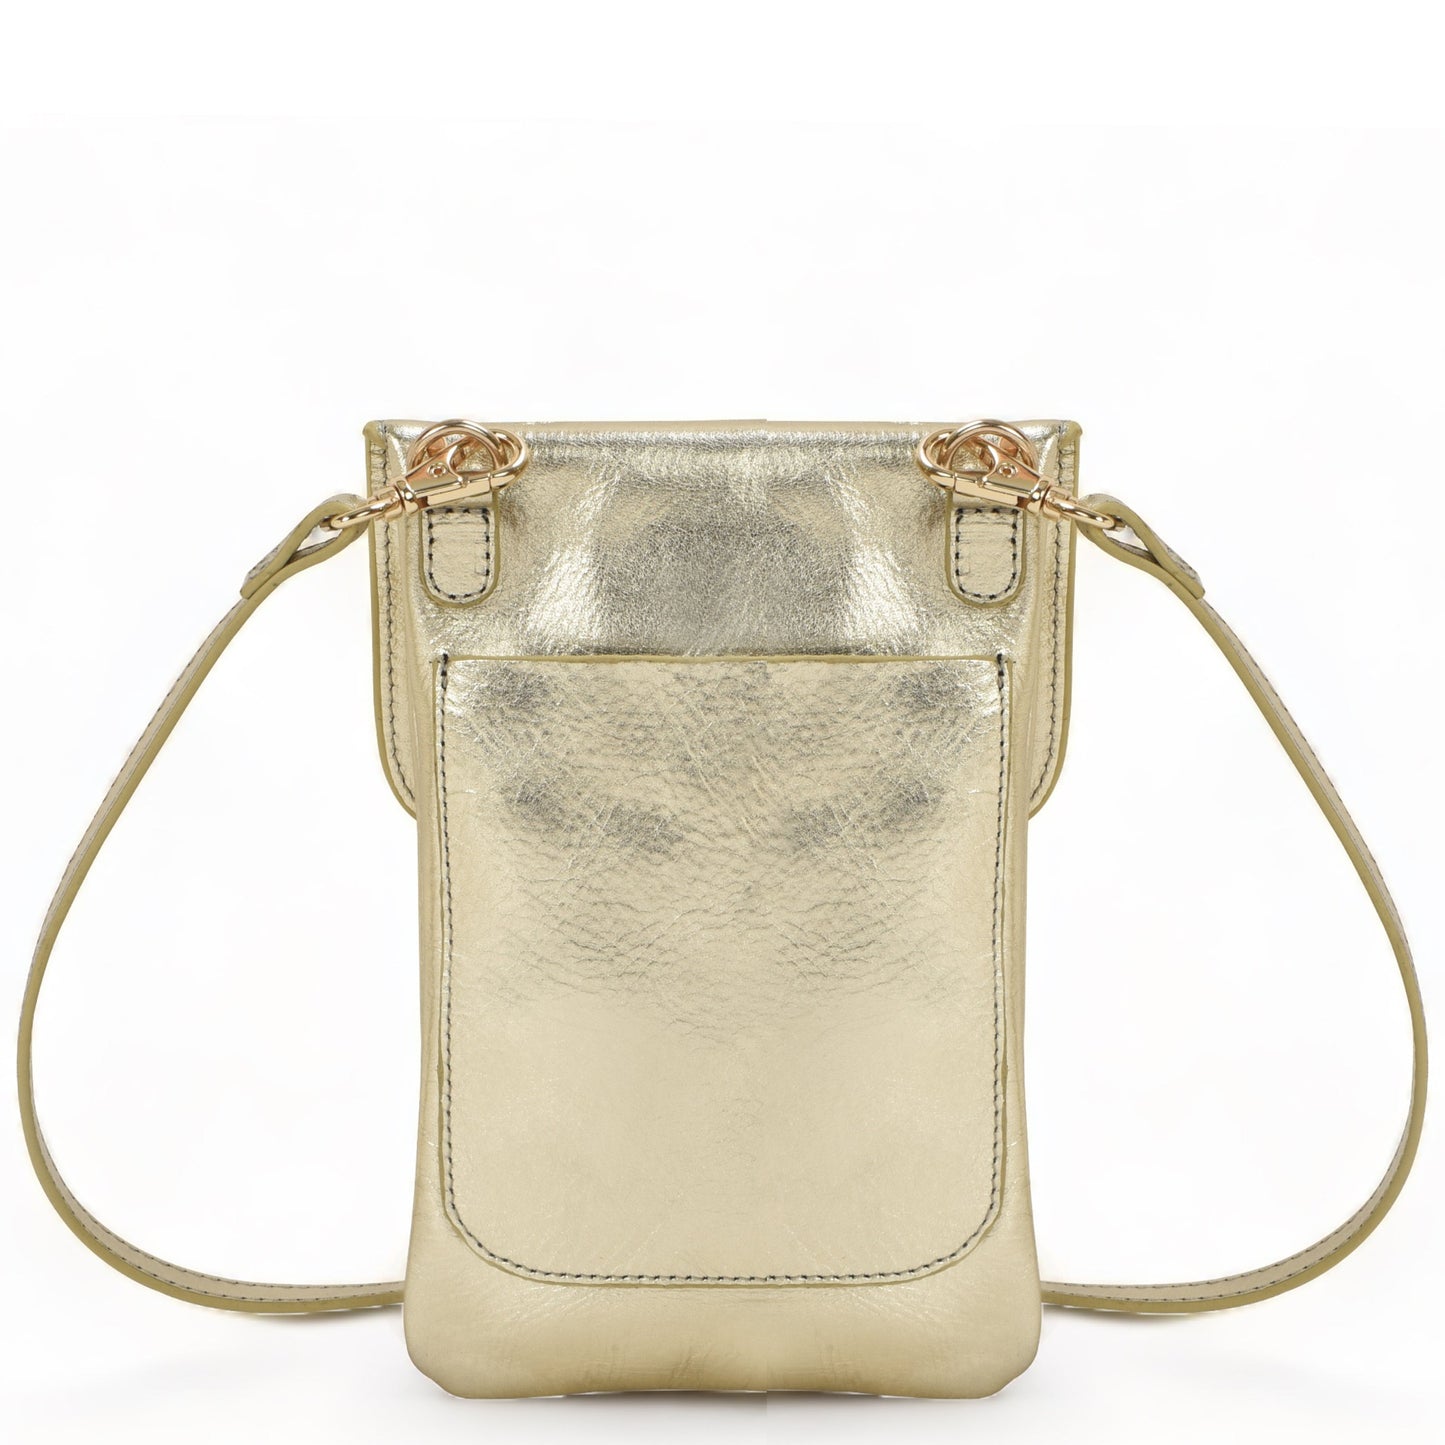 Gold Metallic Sling Leather Bag Brix and Bailey Ethical Leather Bag Brand